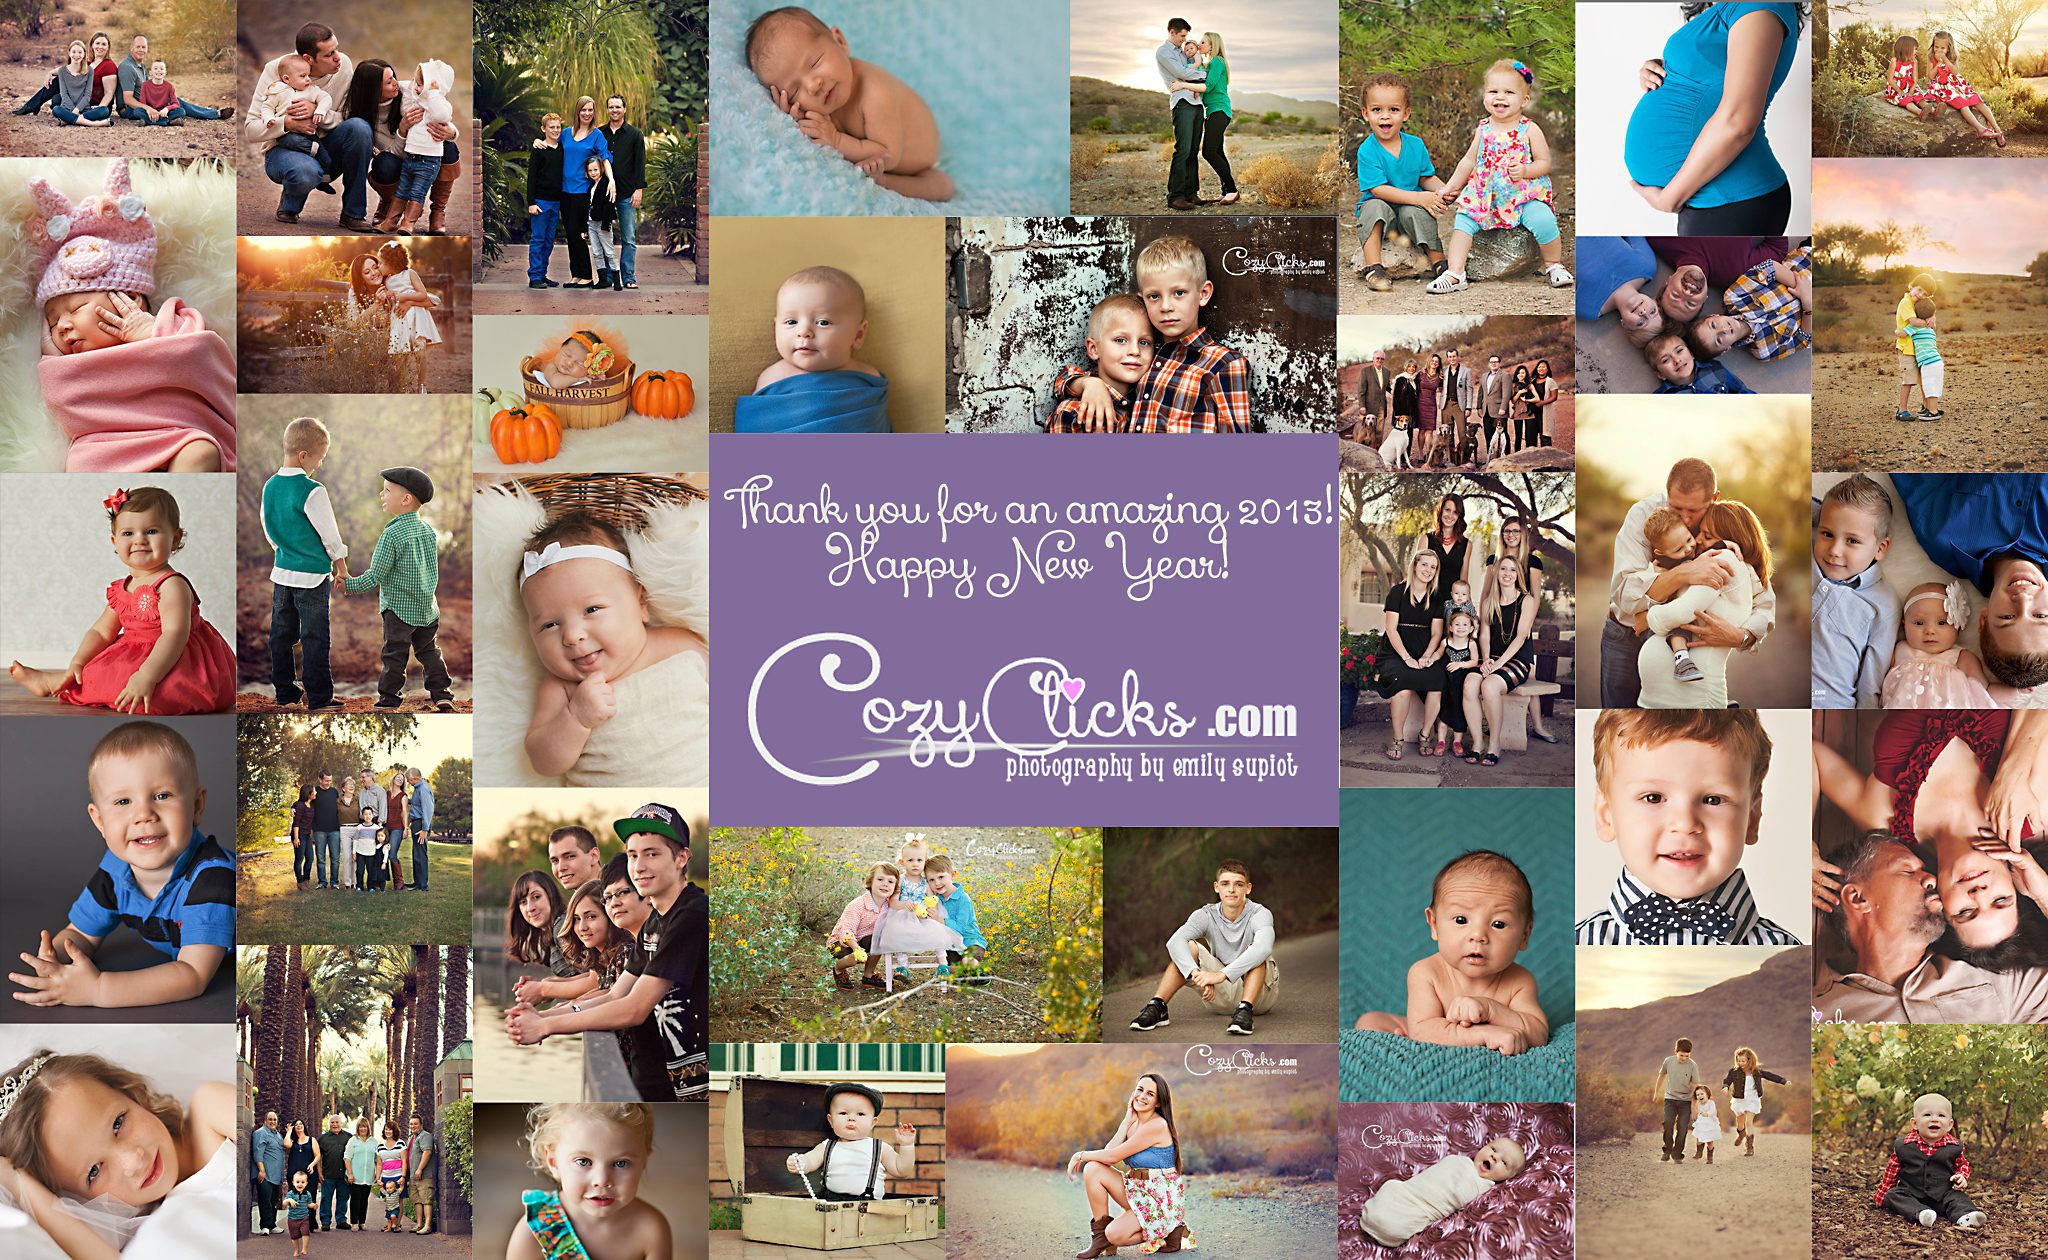 Ahwatukee Child and Family Photographer